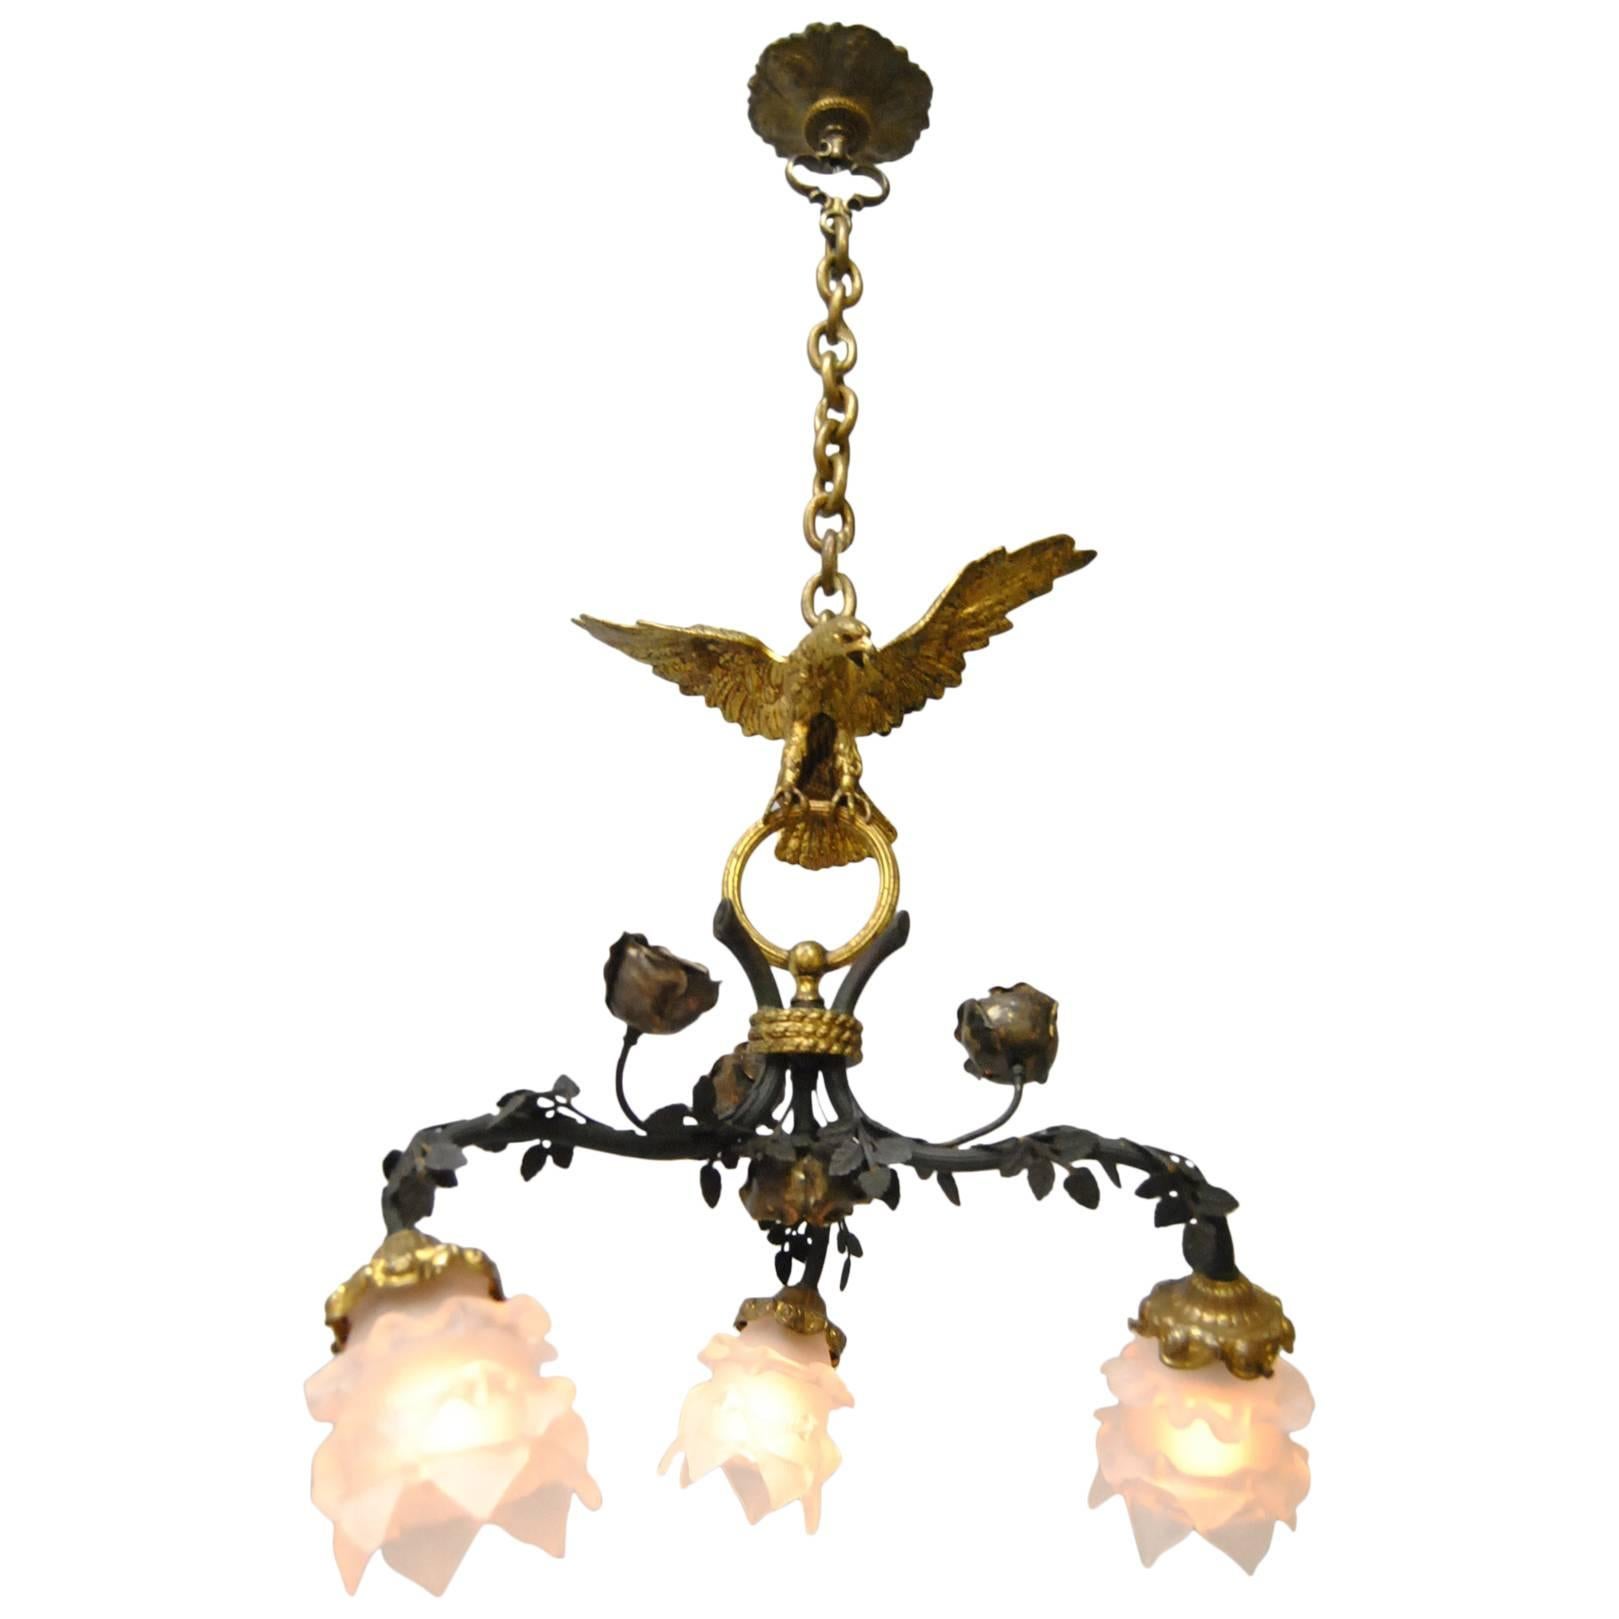 Gorgeous French Empire bronze chandelier with Eagle.  Eagle with outspread wings sits atop three vines.  Bronze shades holders have raised flowers. Each arm holds a flower form shade (new). Fixture has been completely rewired and is ready for use.